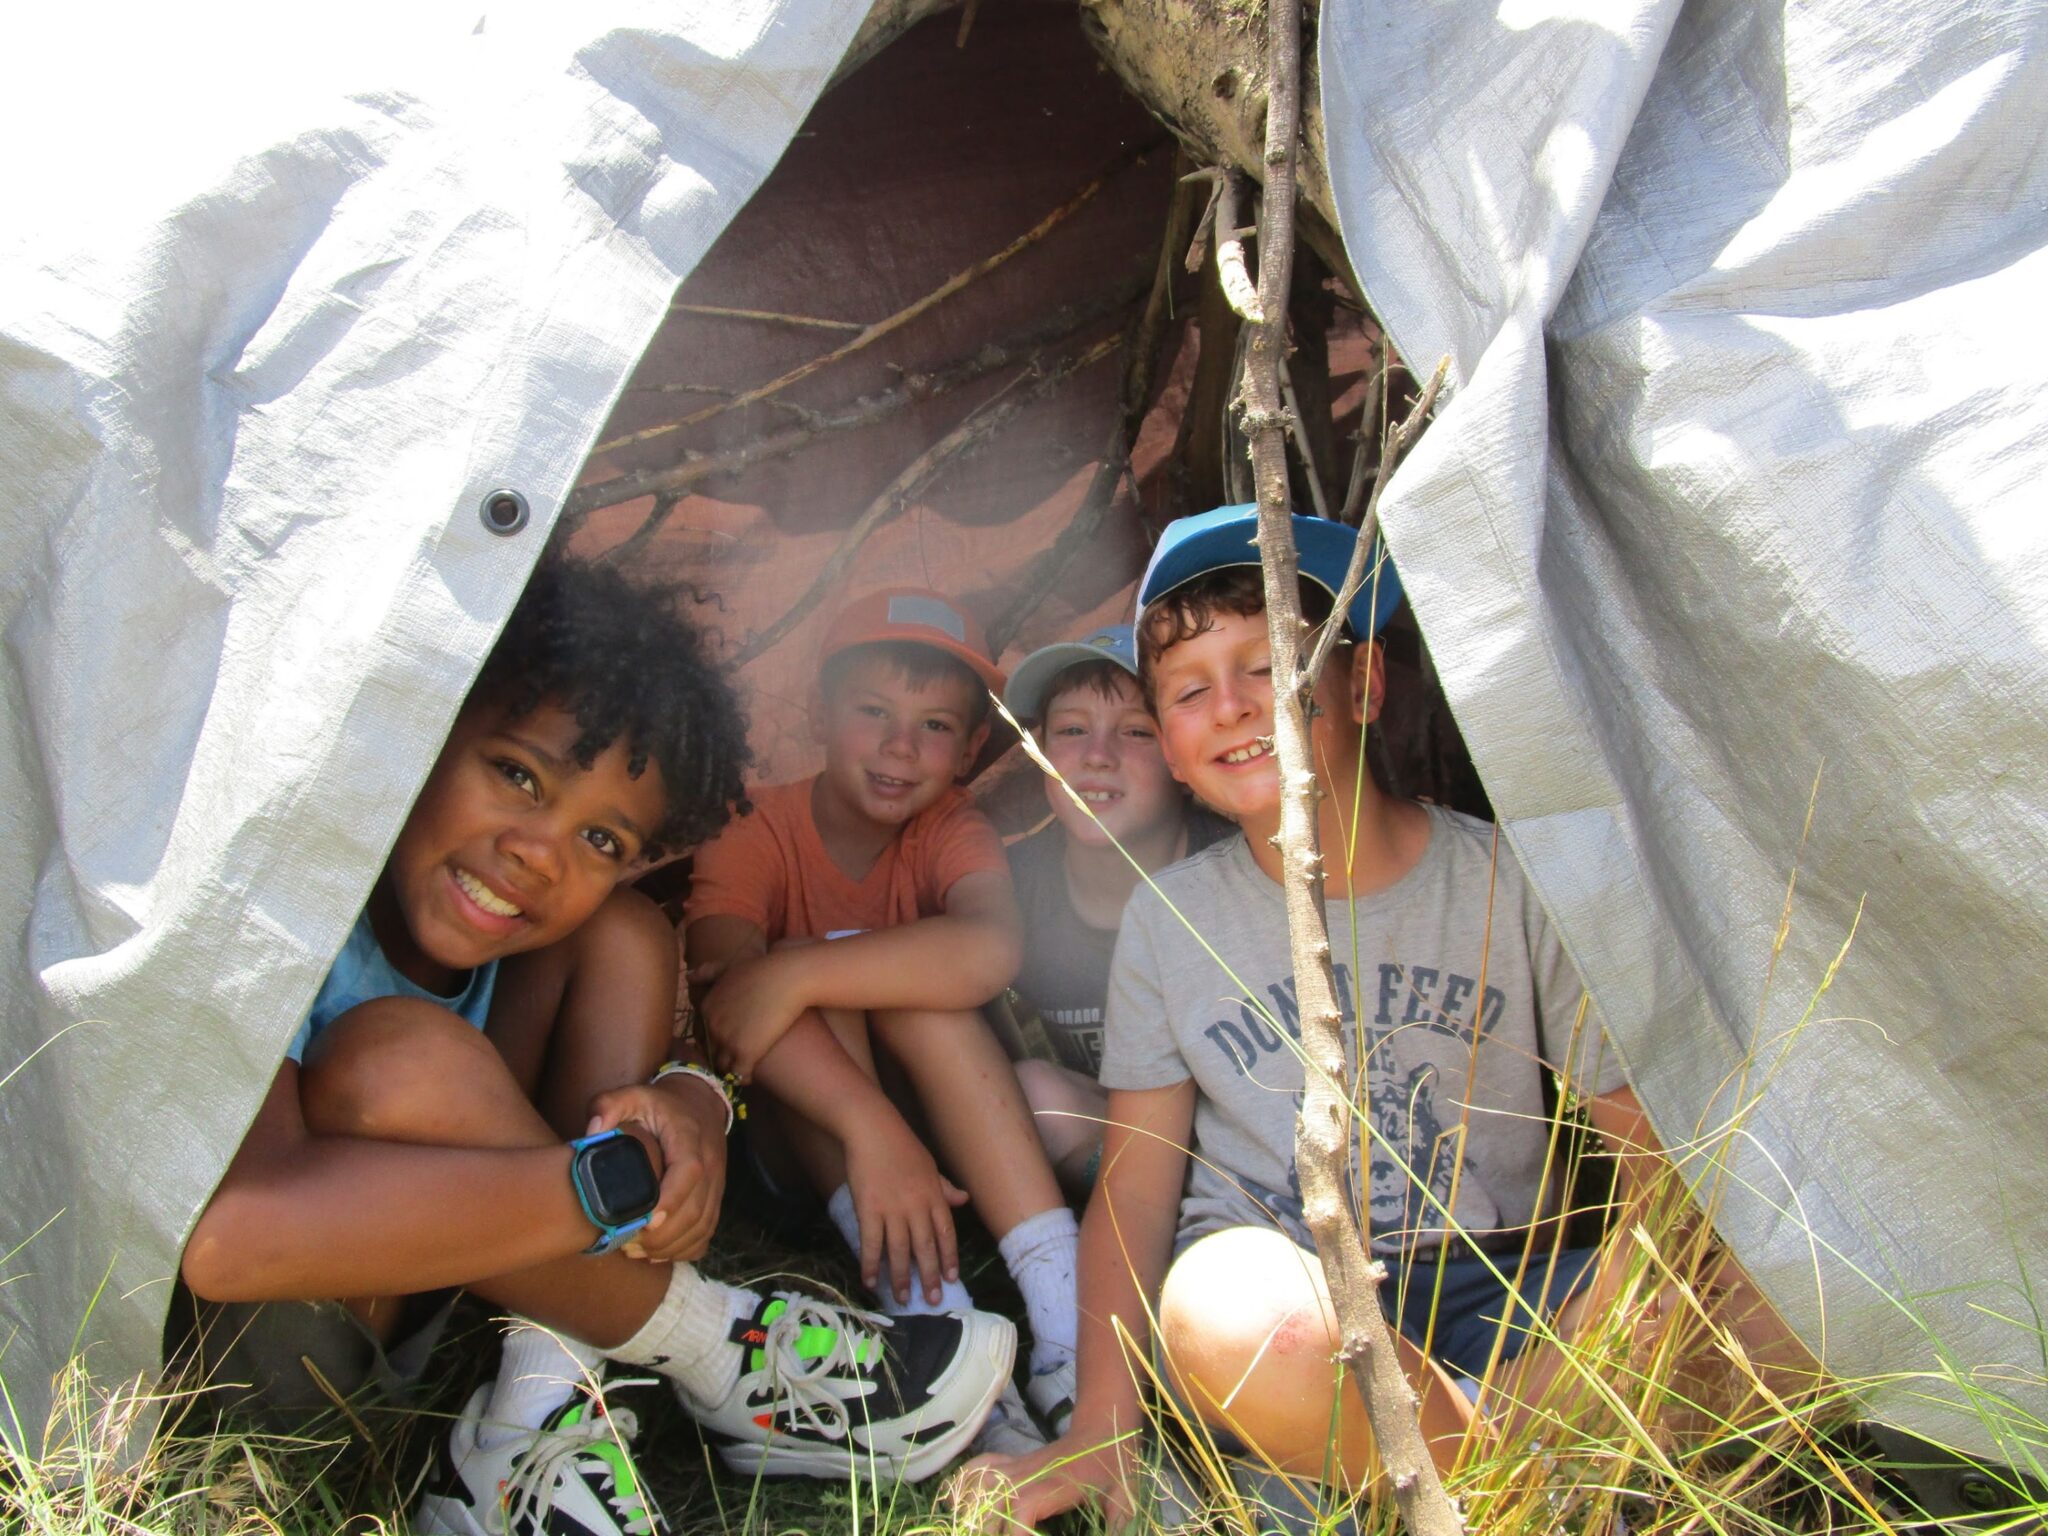 Boys smiling in a homemade tent at summer camp